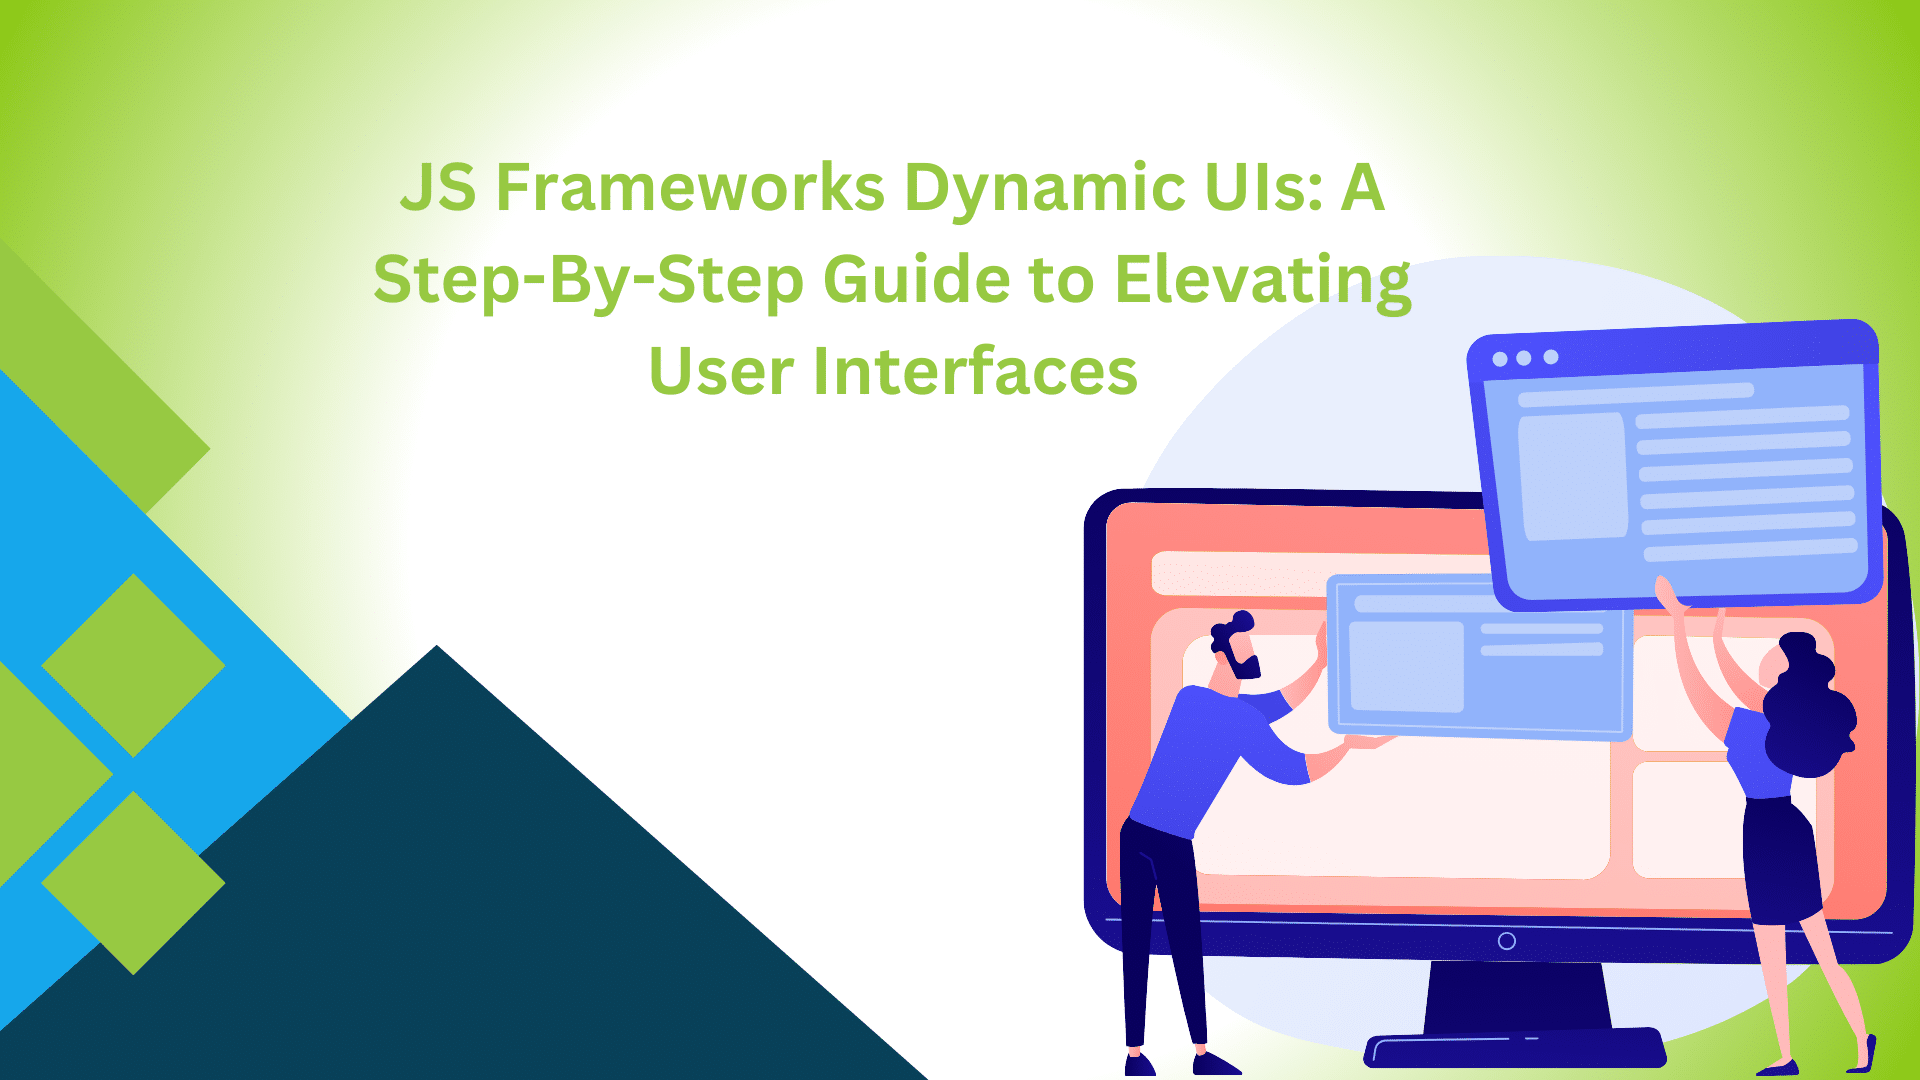 JS Frameworks Dynamic UIs: A Step-By-Step Guide to Elevating User Interfaces